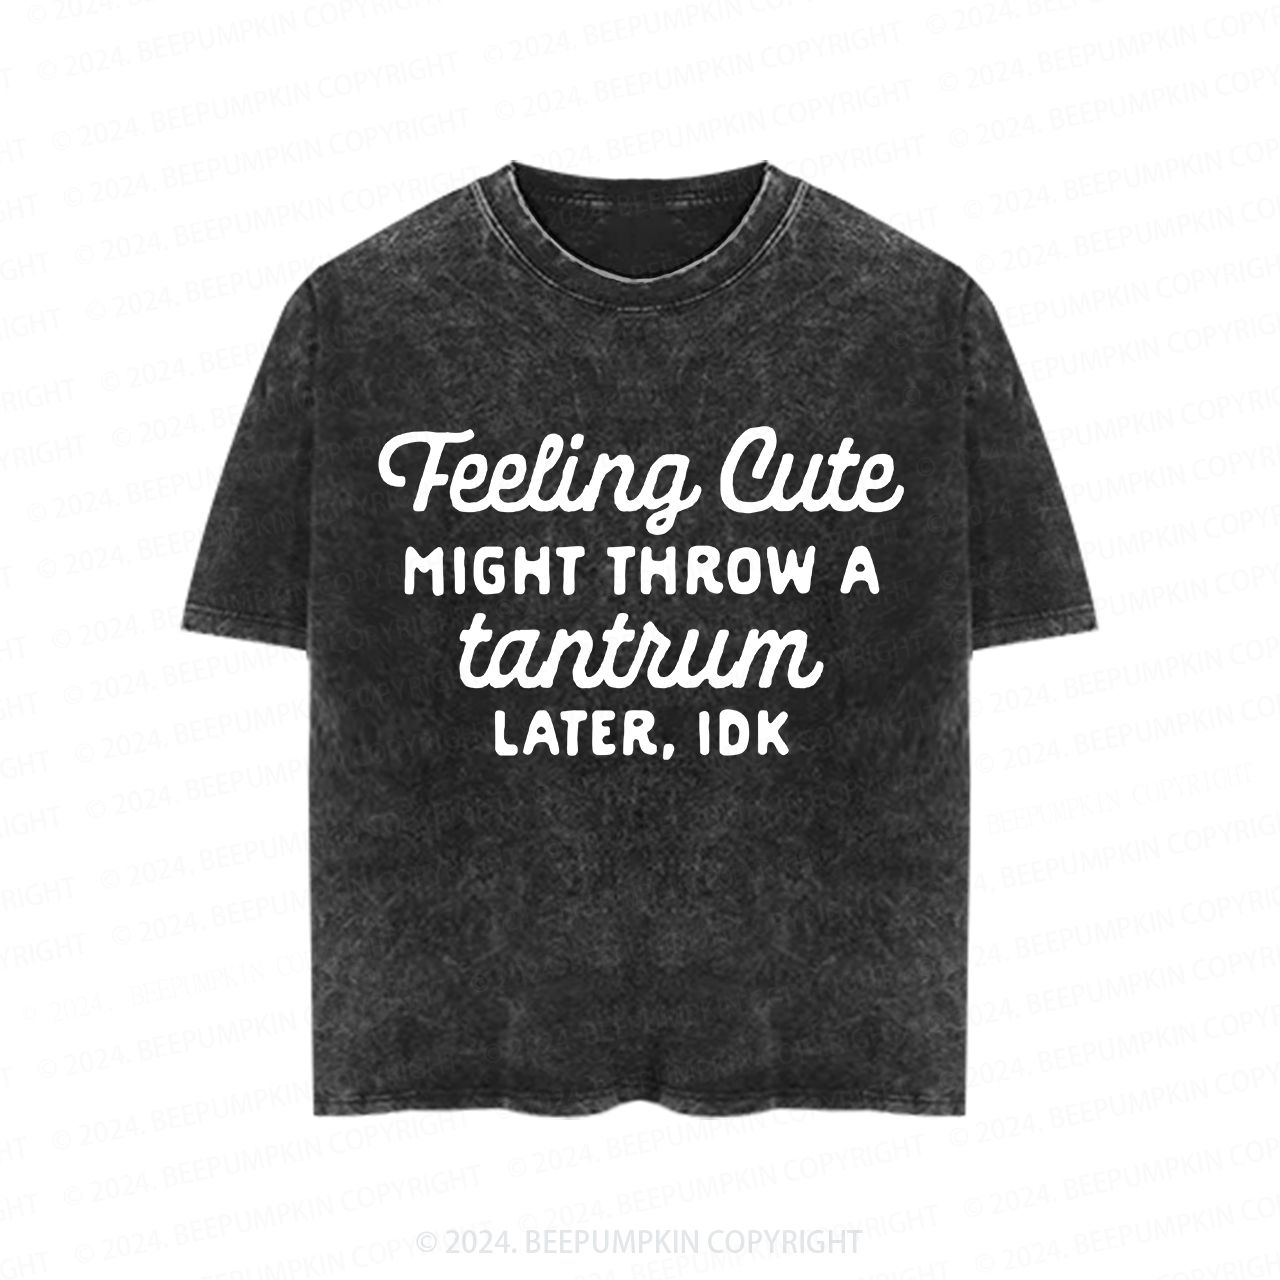 Feeling Cute Might Throw a Tantrum Later, idk Toddler&Kids Washed Tees      